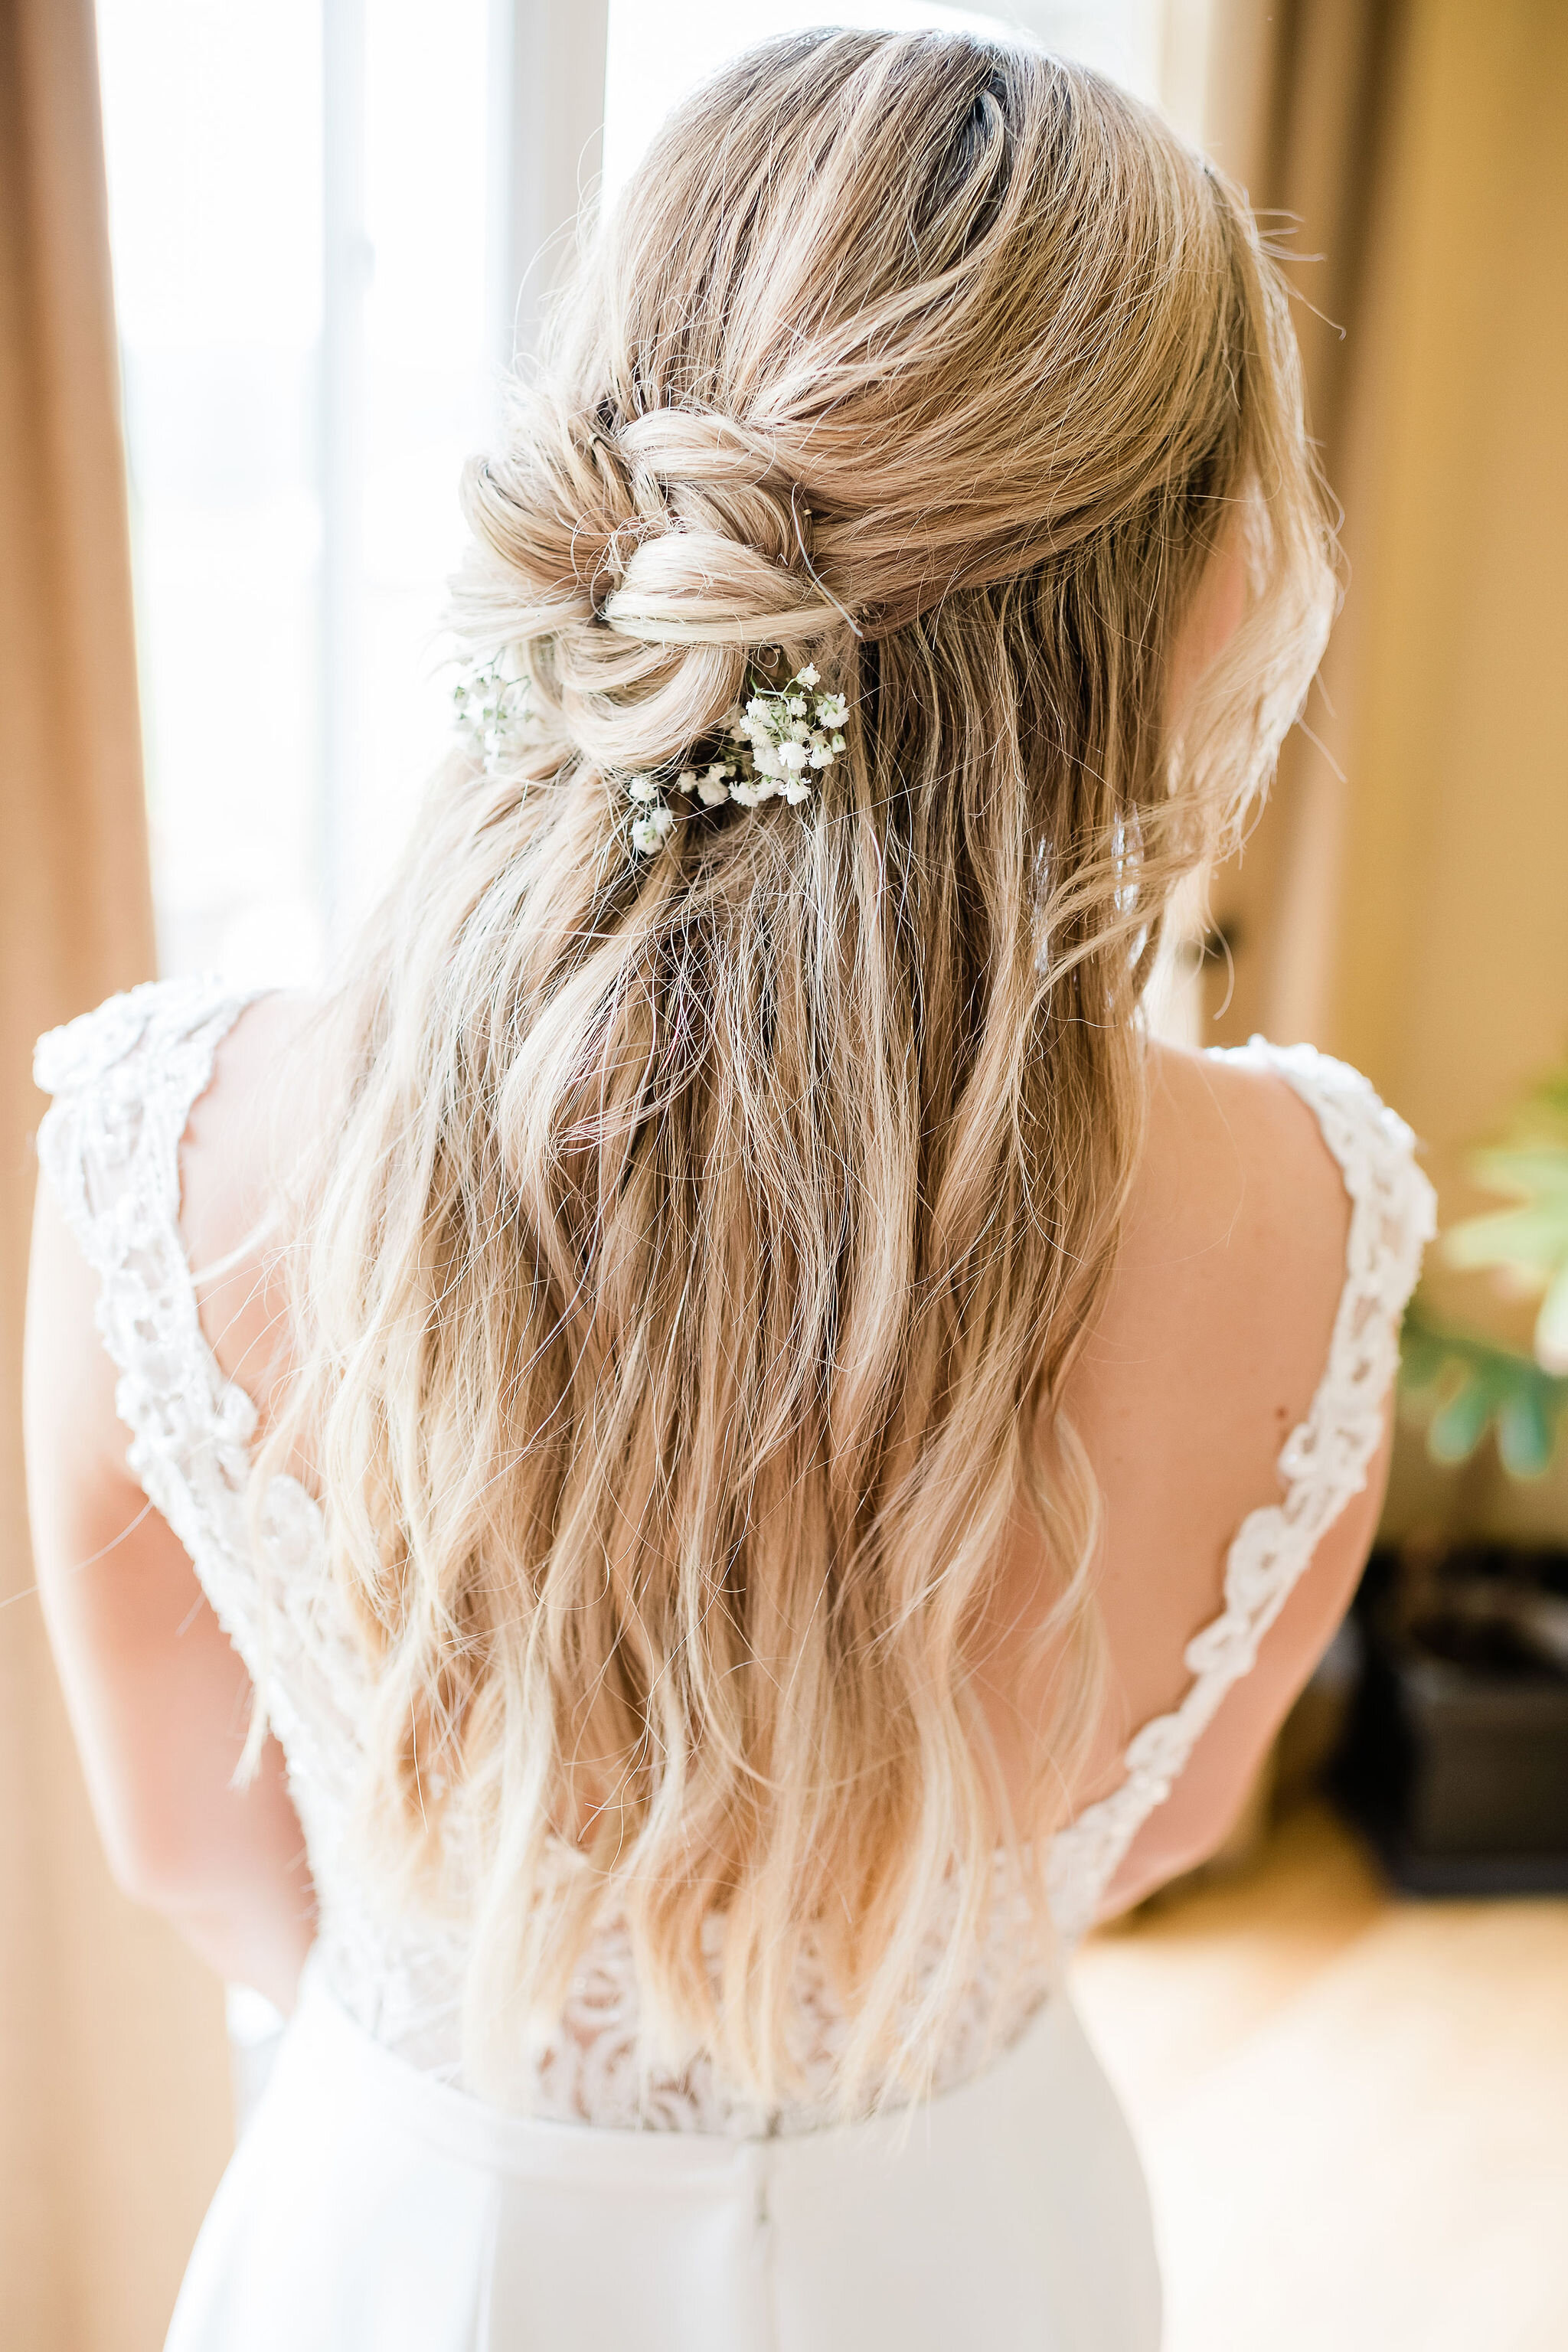 Back of bride's hair